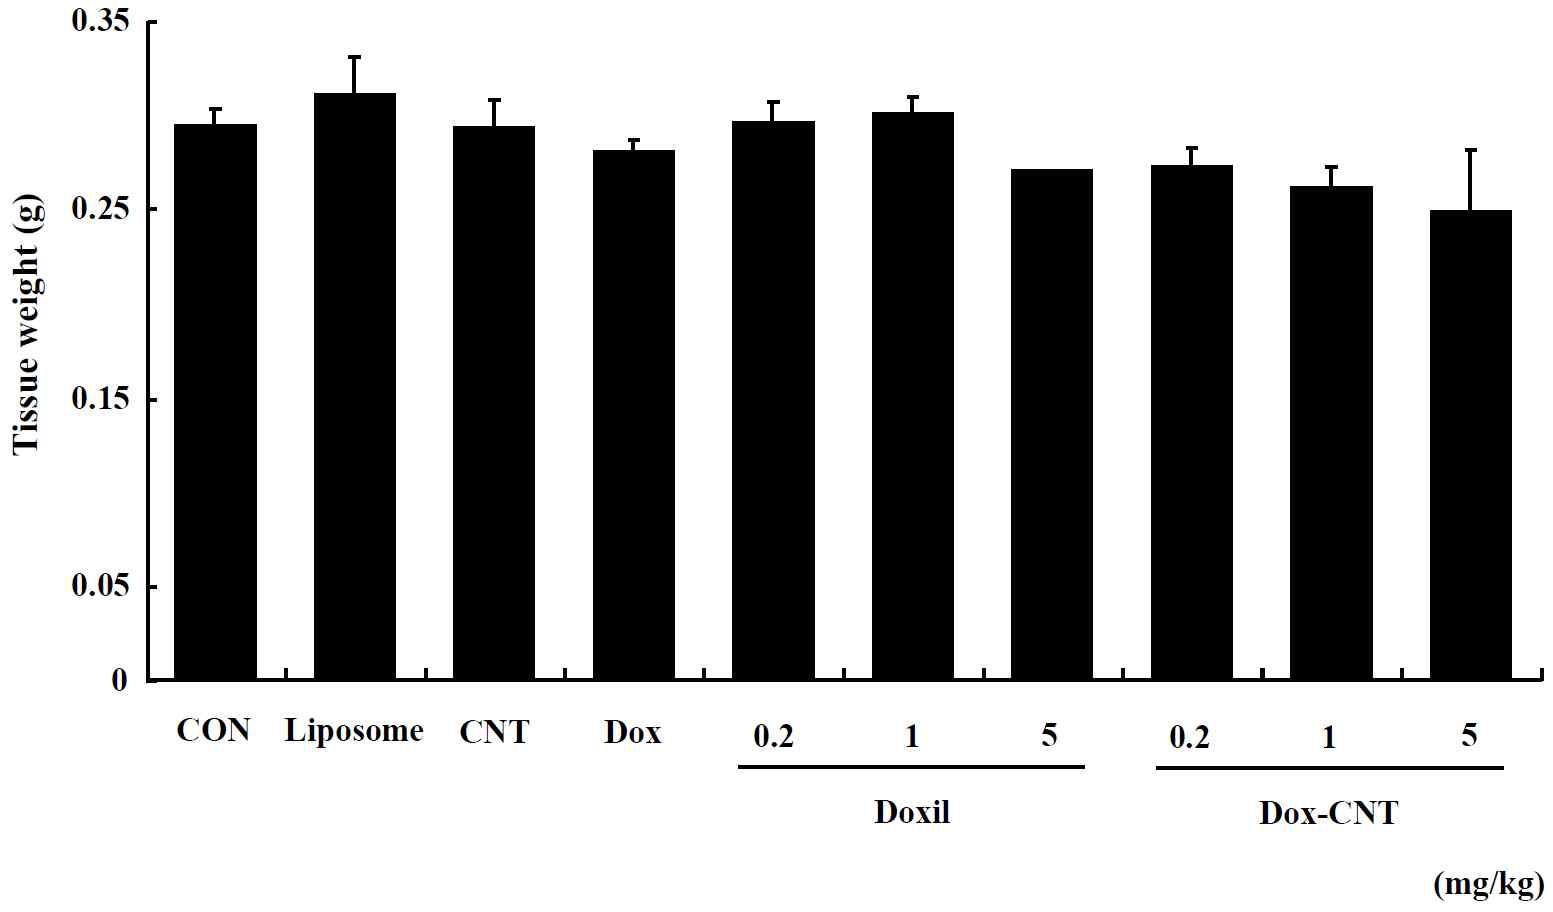 The change of kidney weight in single exposed female ICR mice for 14 days. Mice were respectively administered by intravenous injection with liposome, CNT, Dox, Doxil (0.2, 1, 5 mg/kg) and Dox-CNT (0.2, 1, 5 mg/kg). The results are presented as mean ± SE (n = 10). * p < 0.05, significantly different from the control.